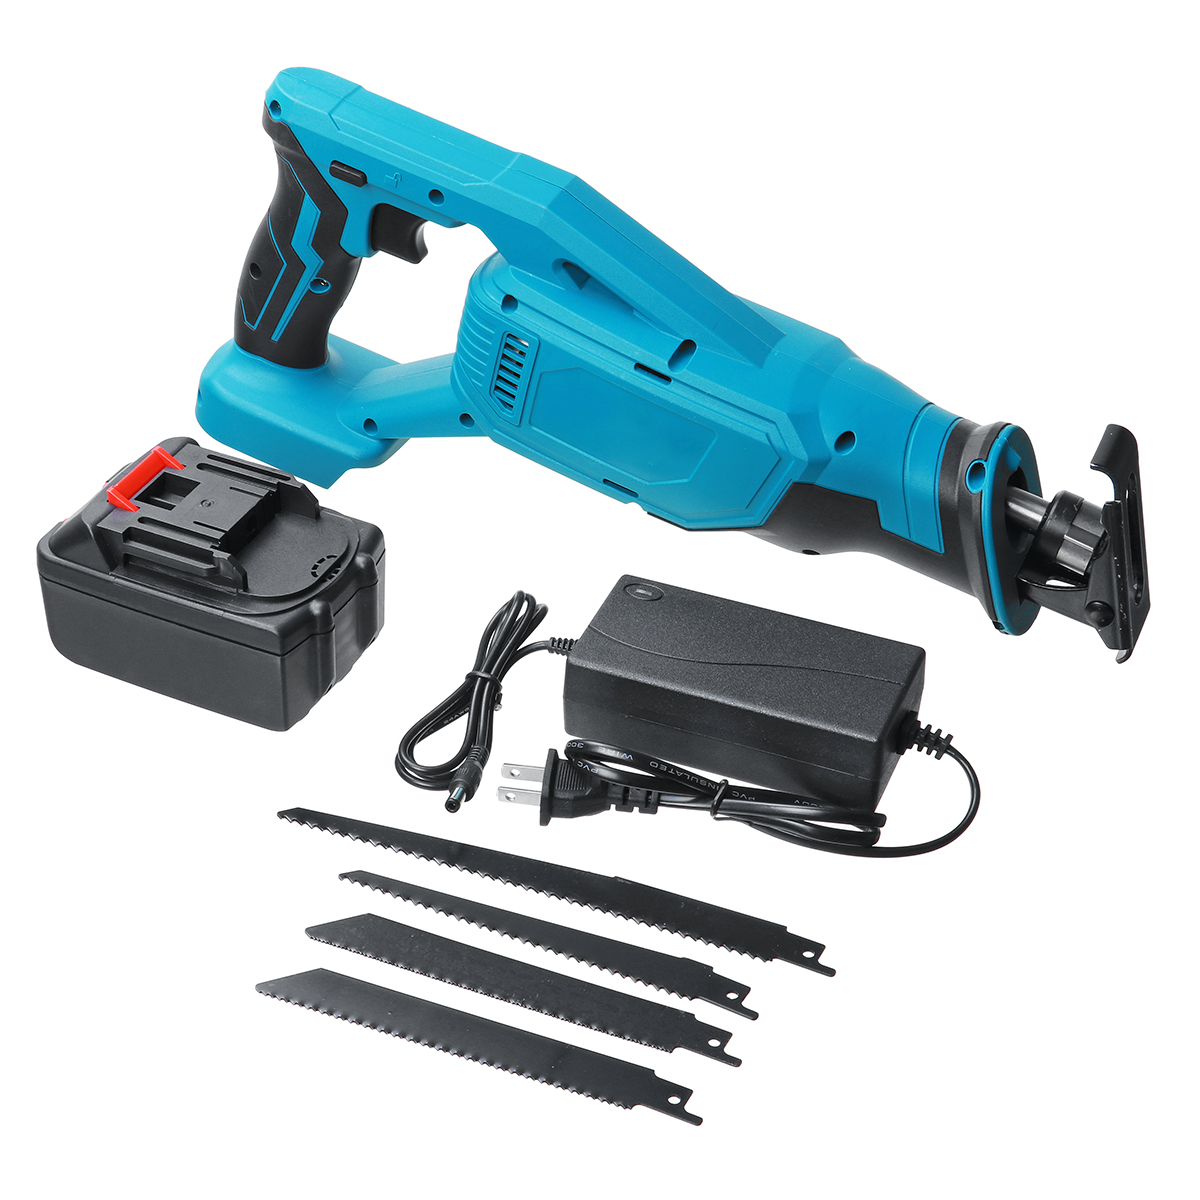 21V-5000Rpm-Reciprocating-Saw-Professional-Electric-Branch-Cutter-Recipro-Saw-W-1pc-Battery-1818077-4